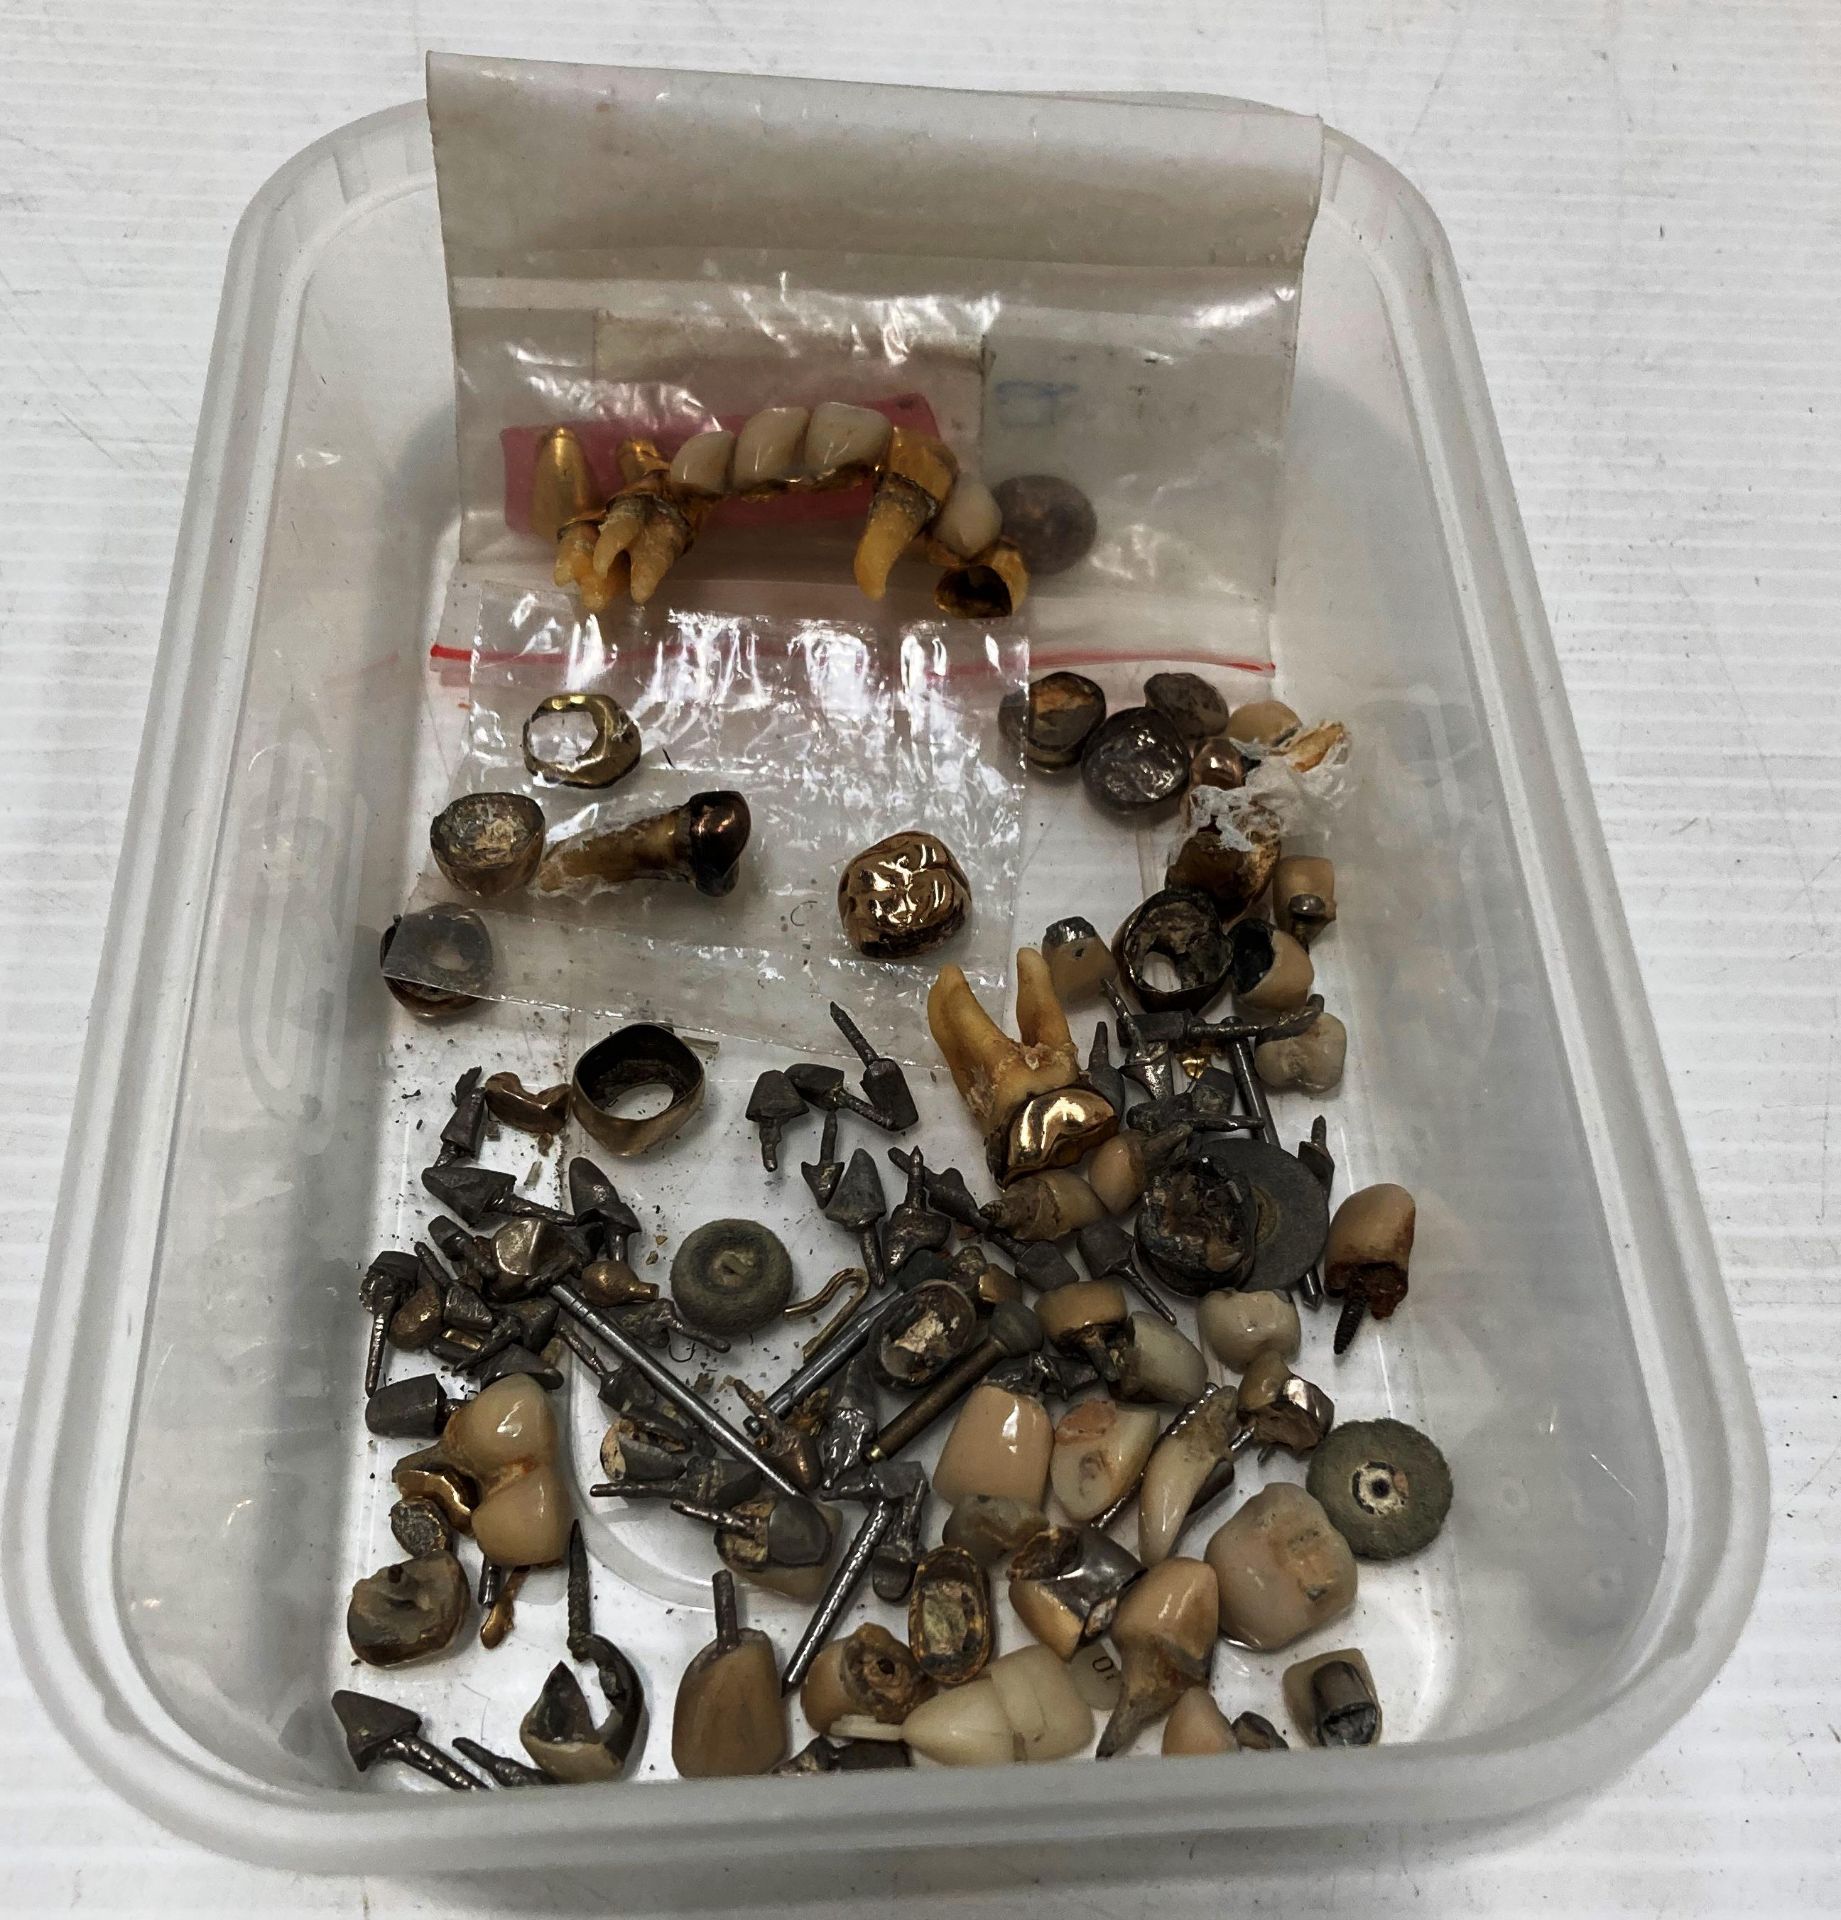 Contents to plastic tray - assorted gold and other teeth - total weight including tray 5.